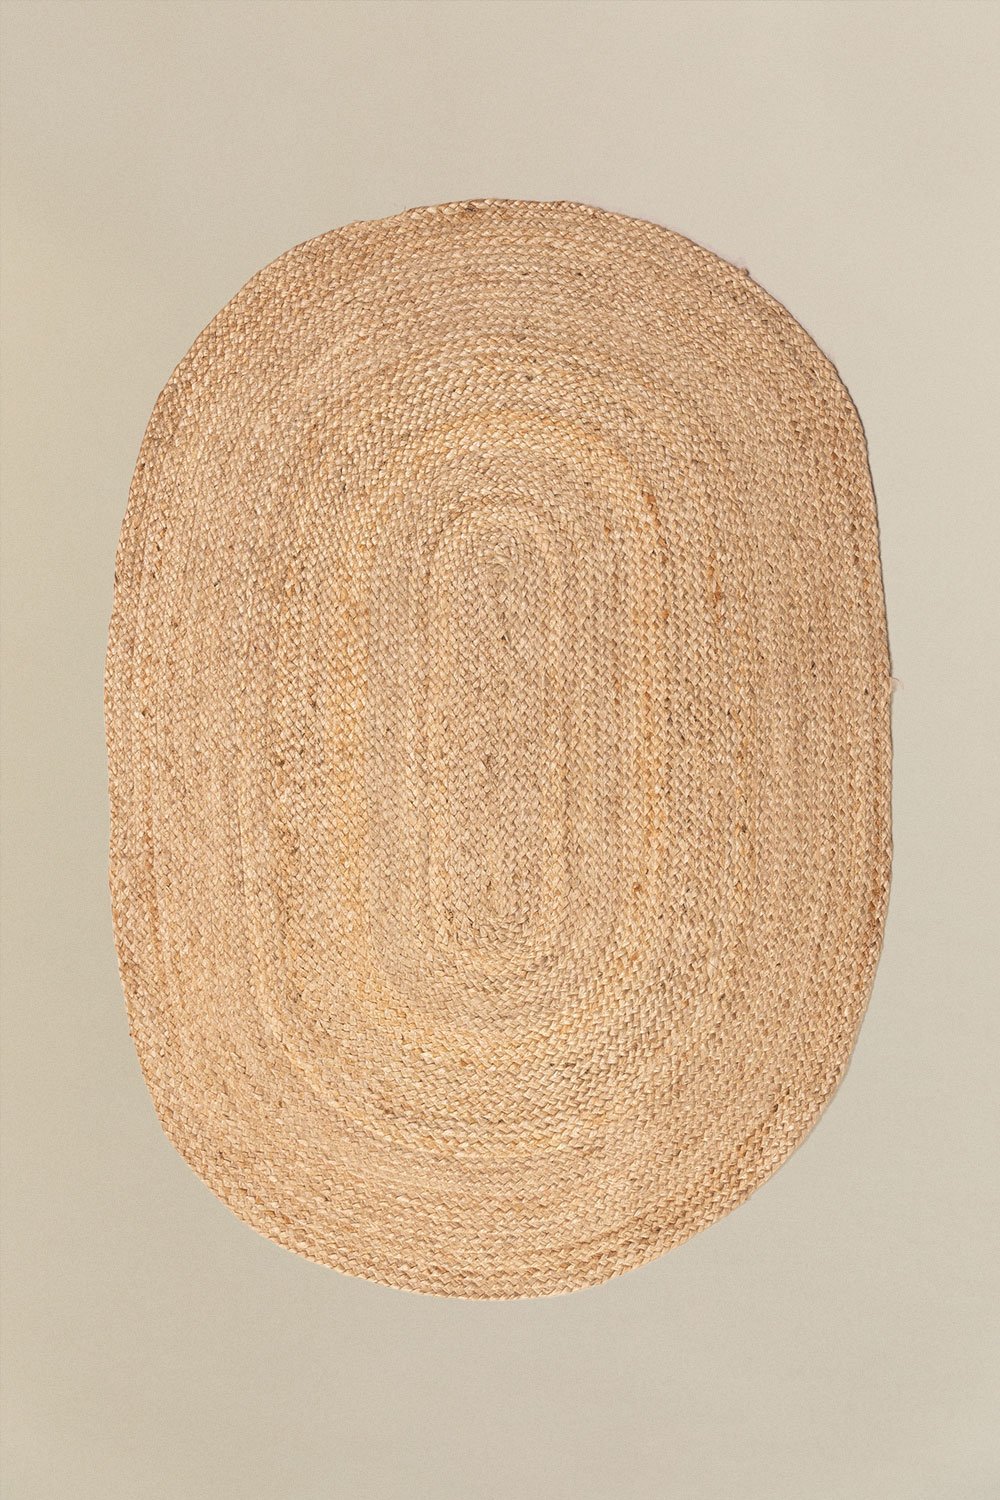 Oval Natural Jute Rug (141 x 99.5 cm) Tempo, gallery image 1